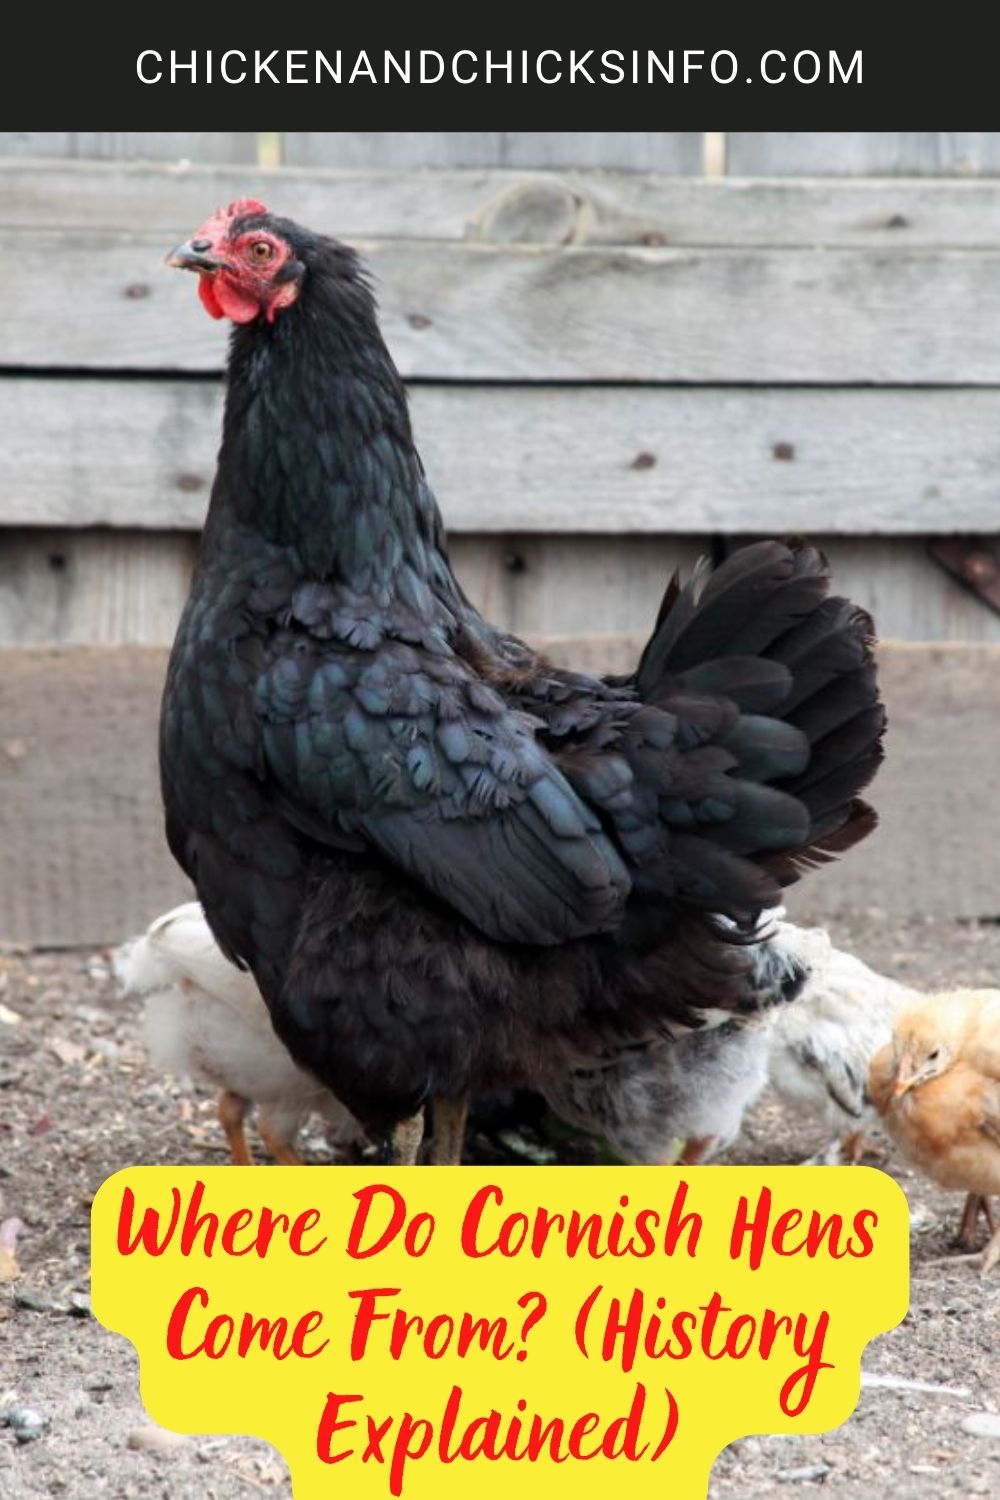 Where Do Cornish Hens Come From? (History Explained) poster.
